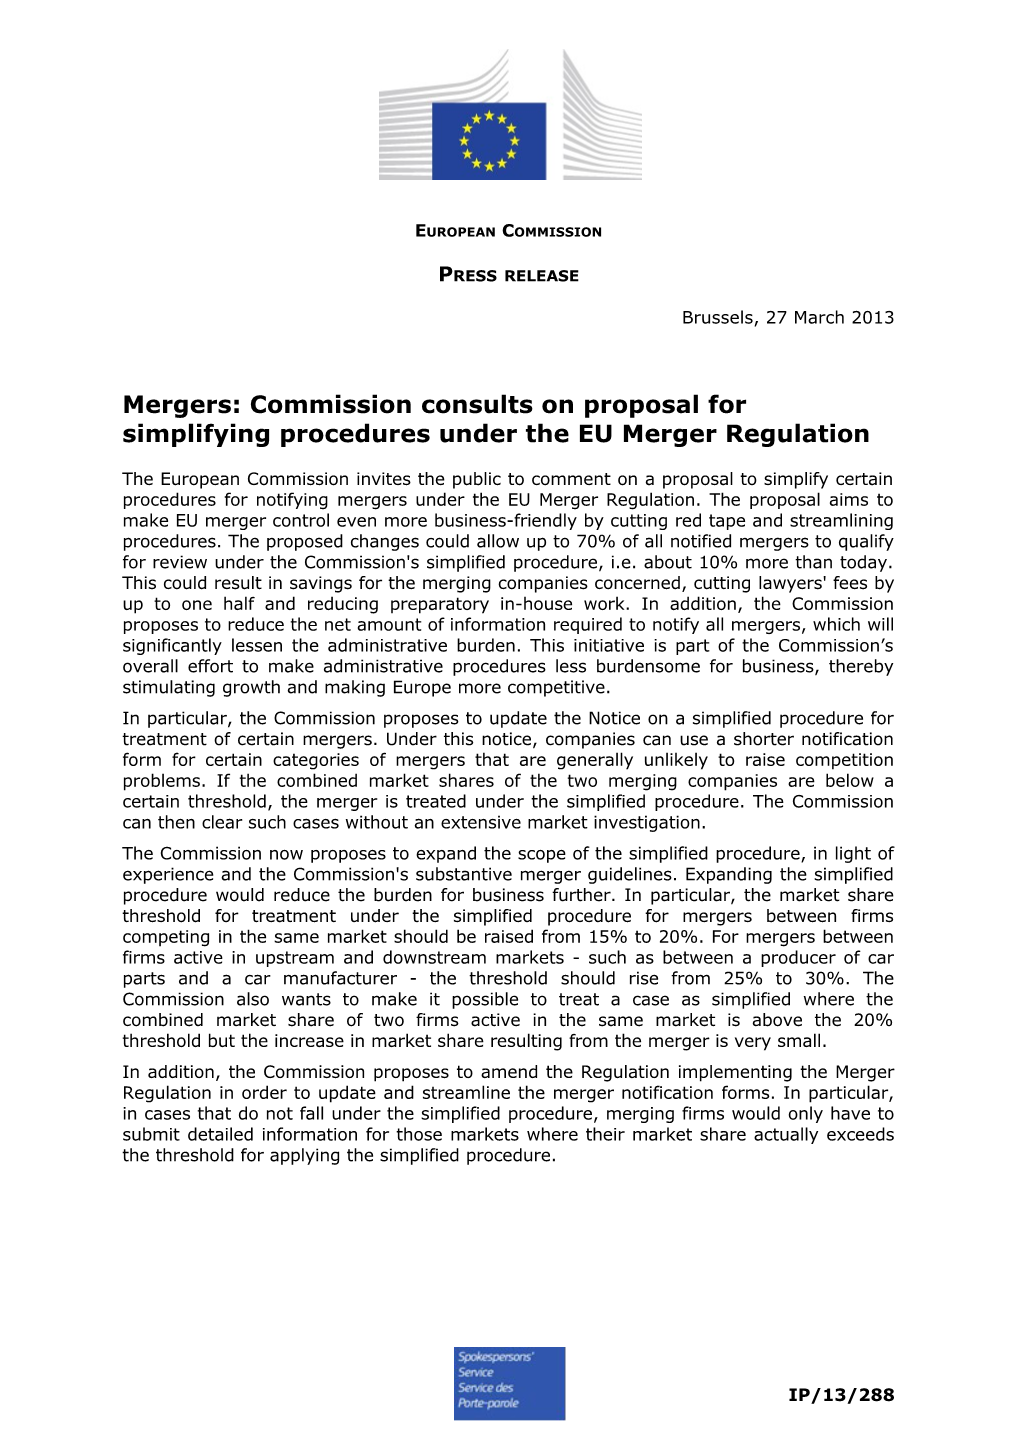 Mergers: Commission Consults on Proposal for Simplifying Procedures Under the EU Merger